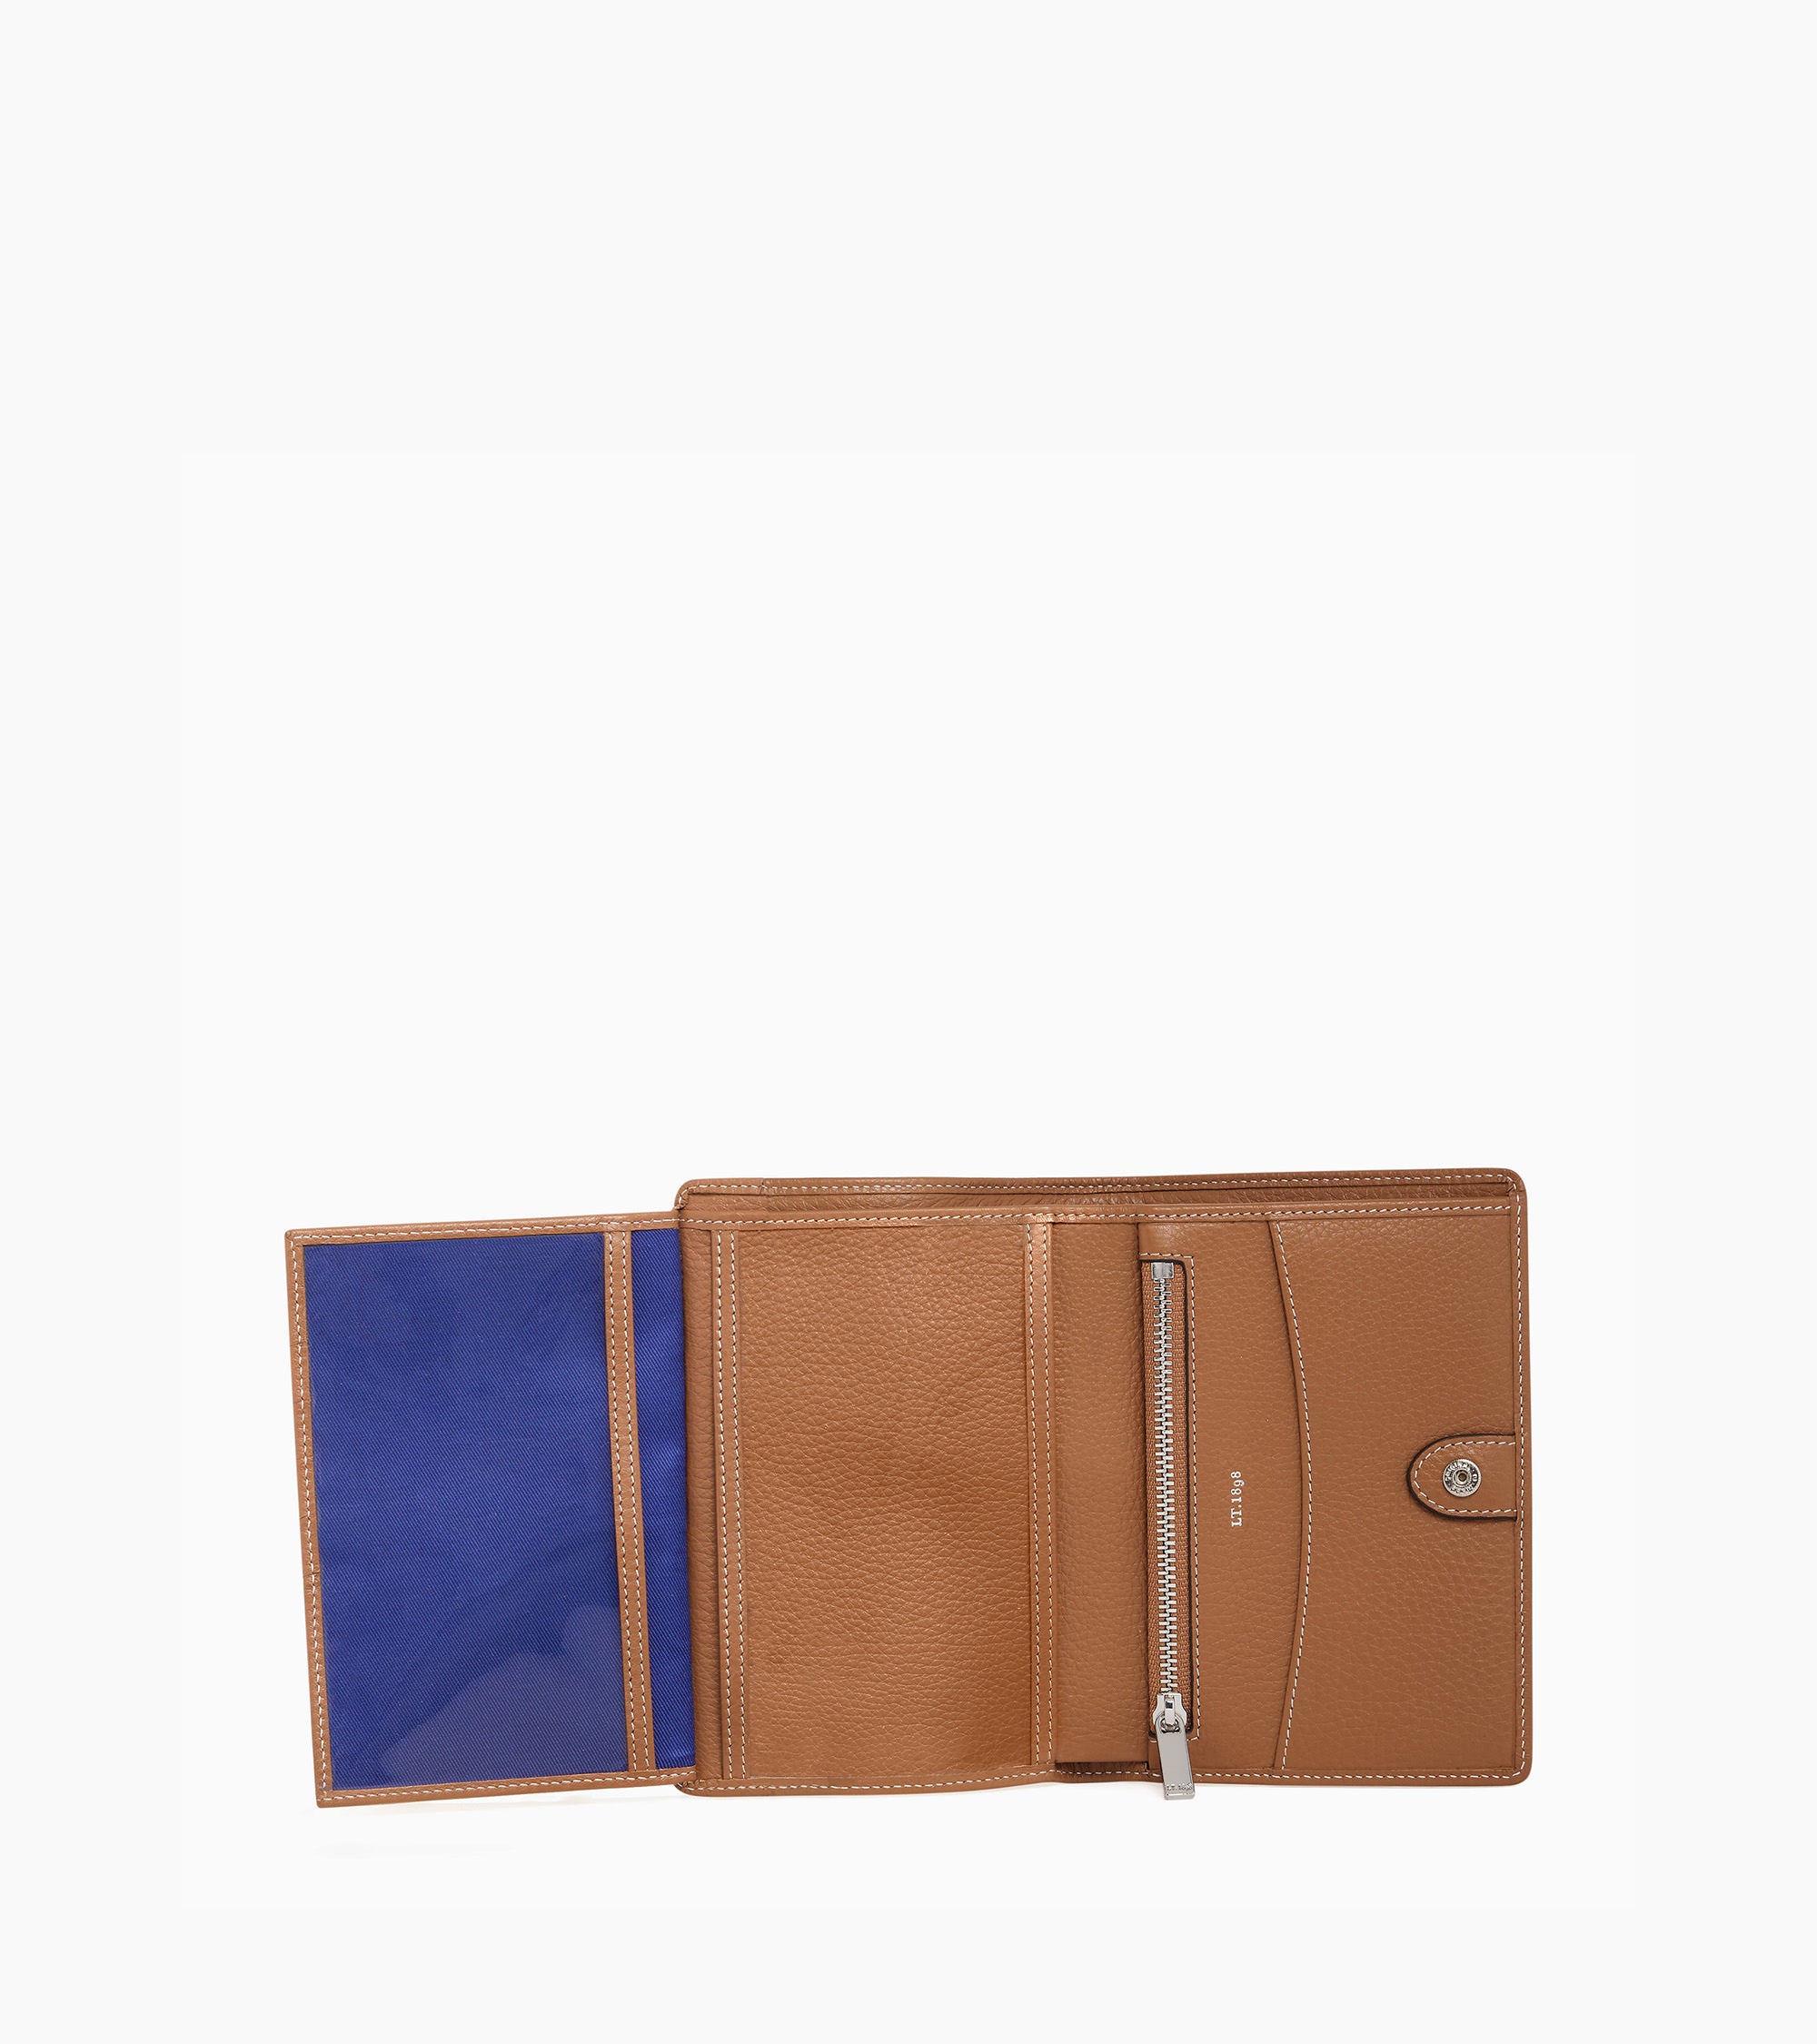 Romy medium-sized wallet in pebbled leather